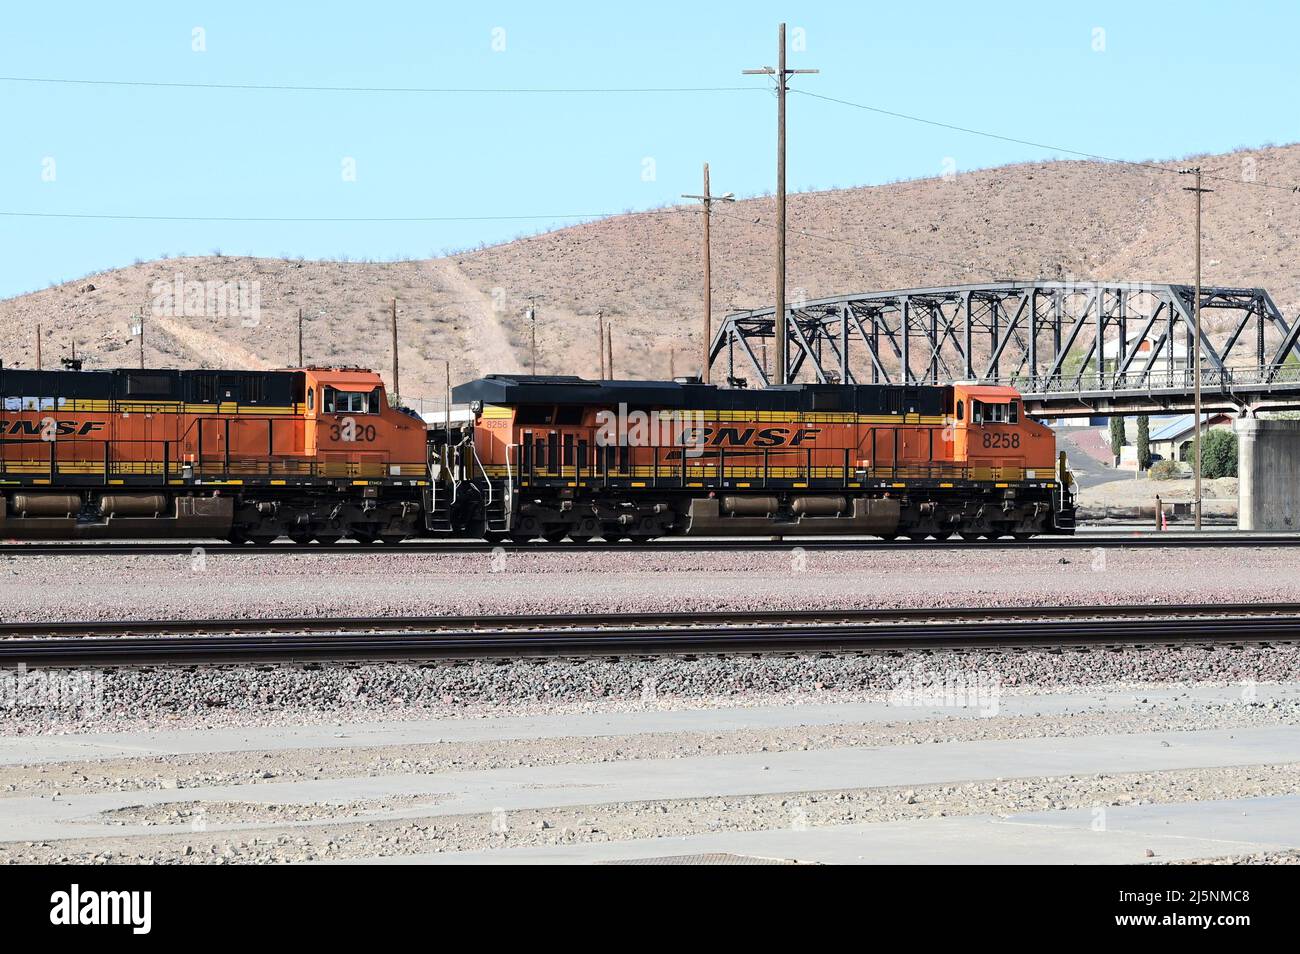 BNSF 7780 BNSF Railway GE ES44DC locomotive passing through Barstow station with a freight train. Stock Photo